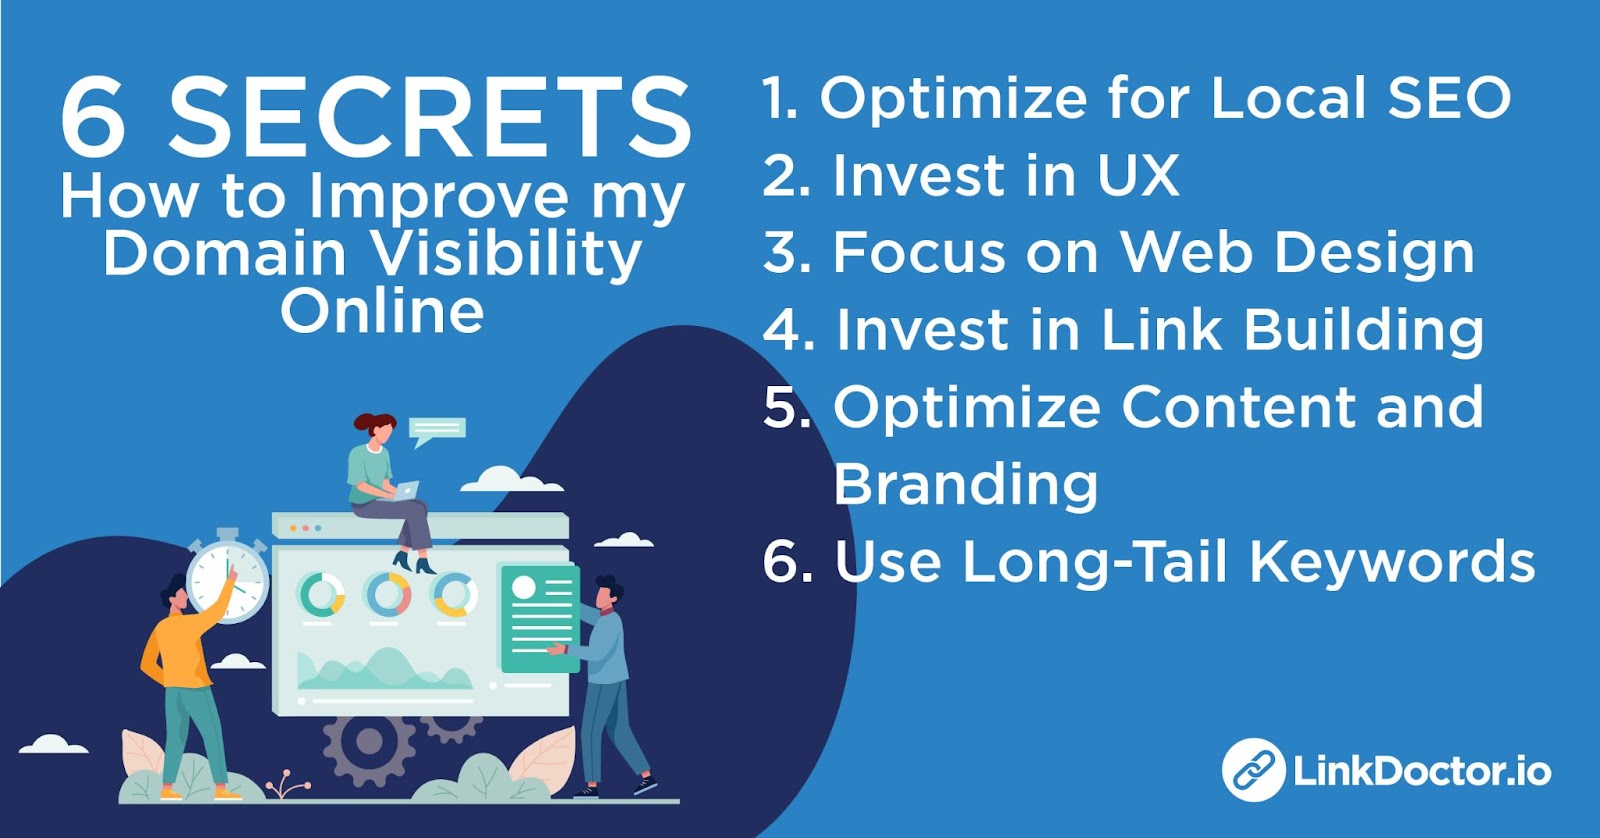 Summary of How to Improve my Domain Visibility Online (6 secrets)